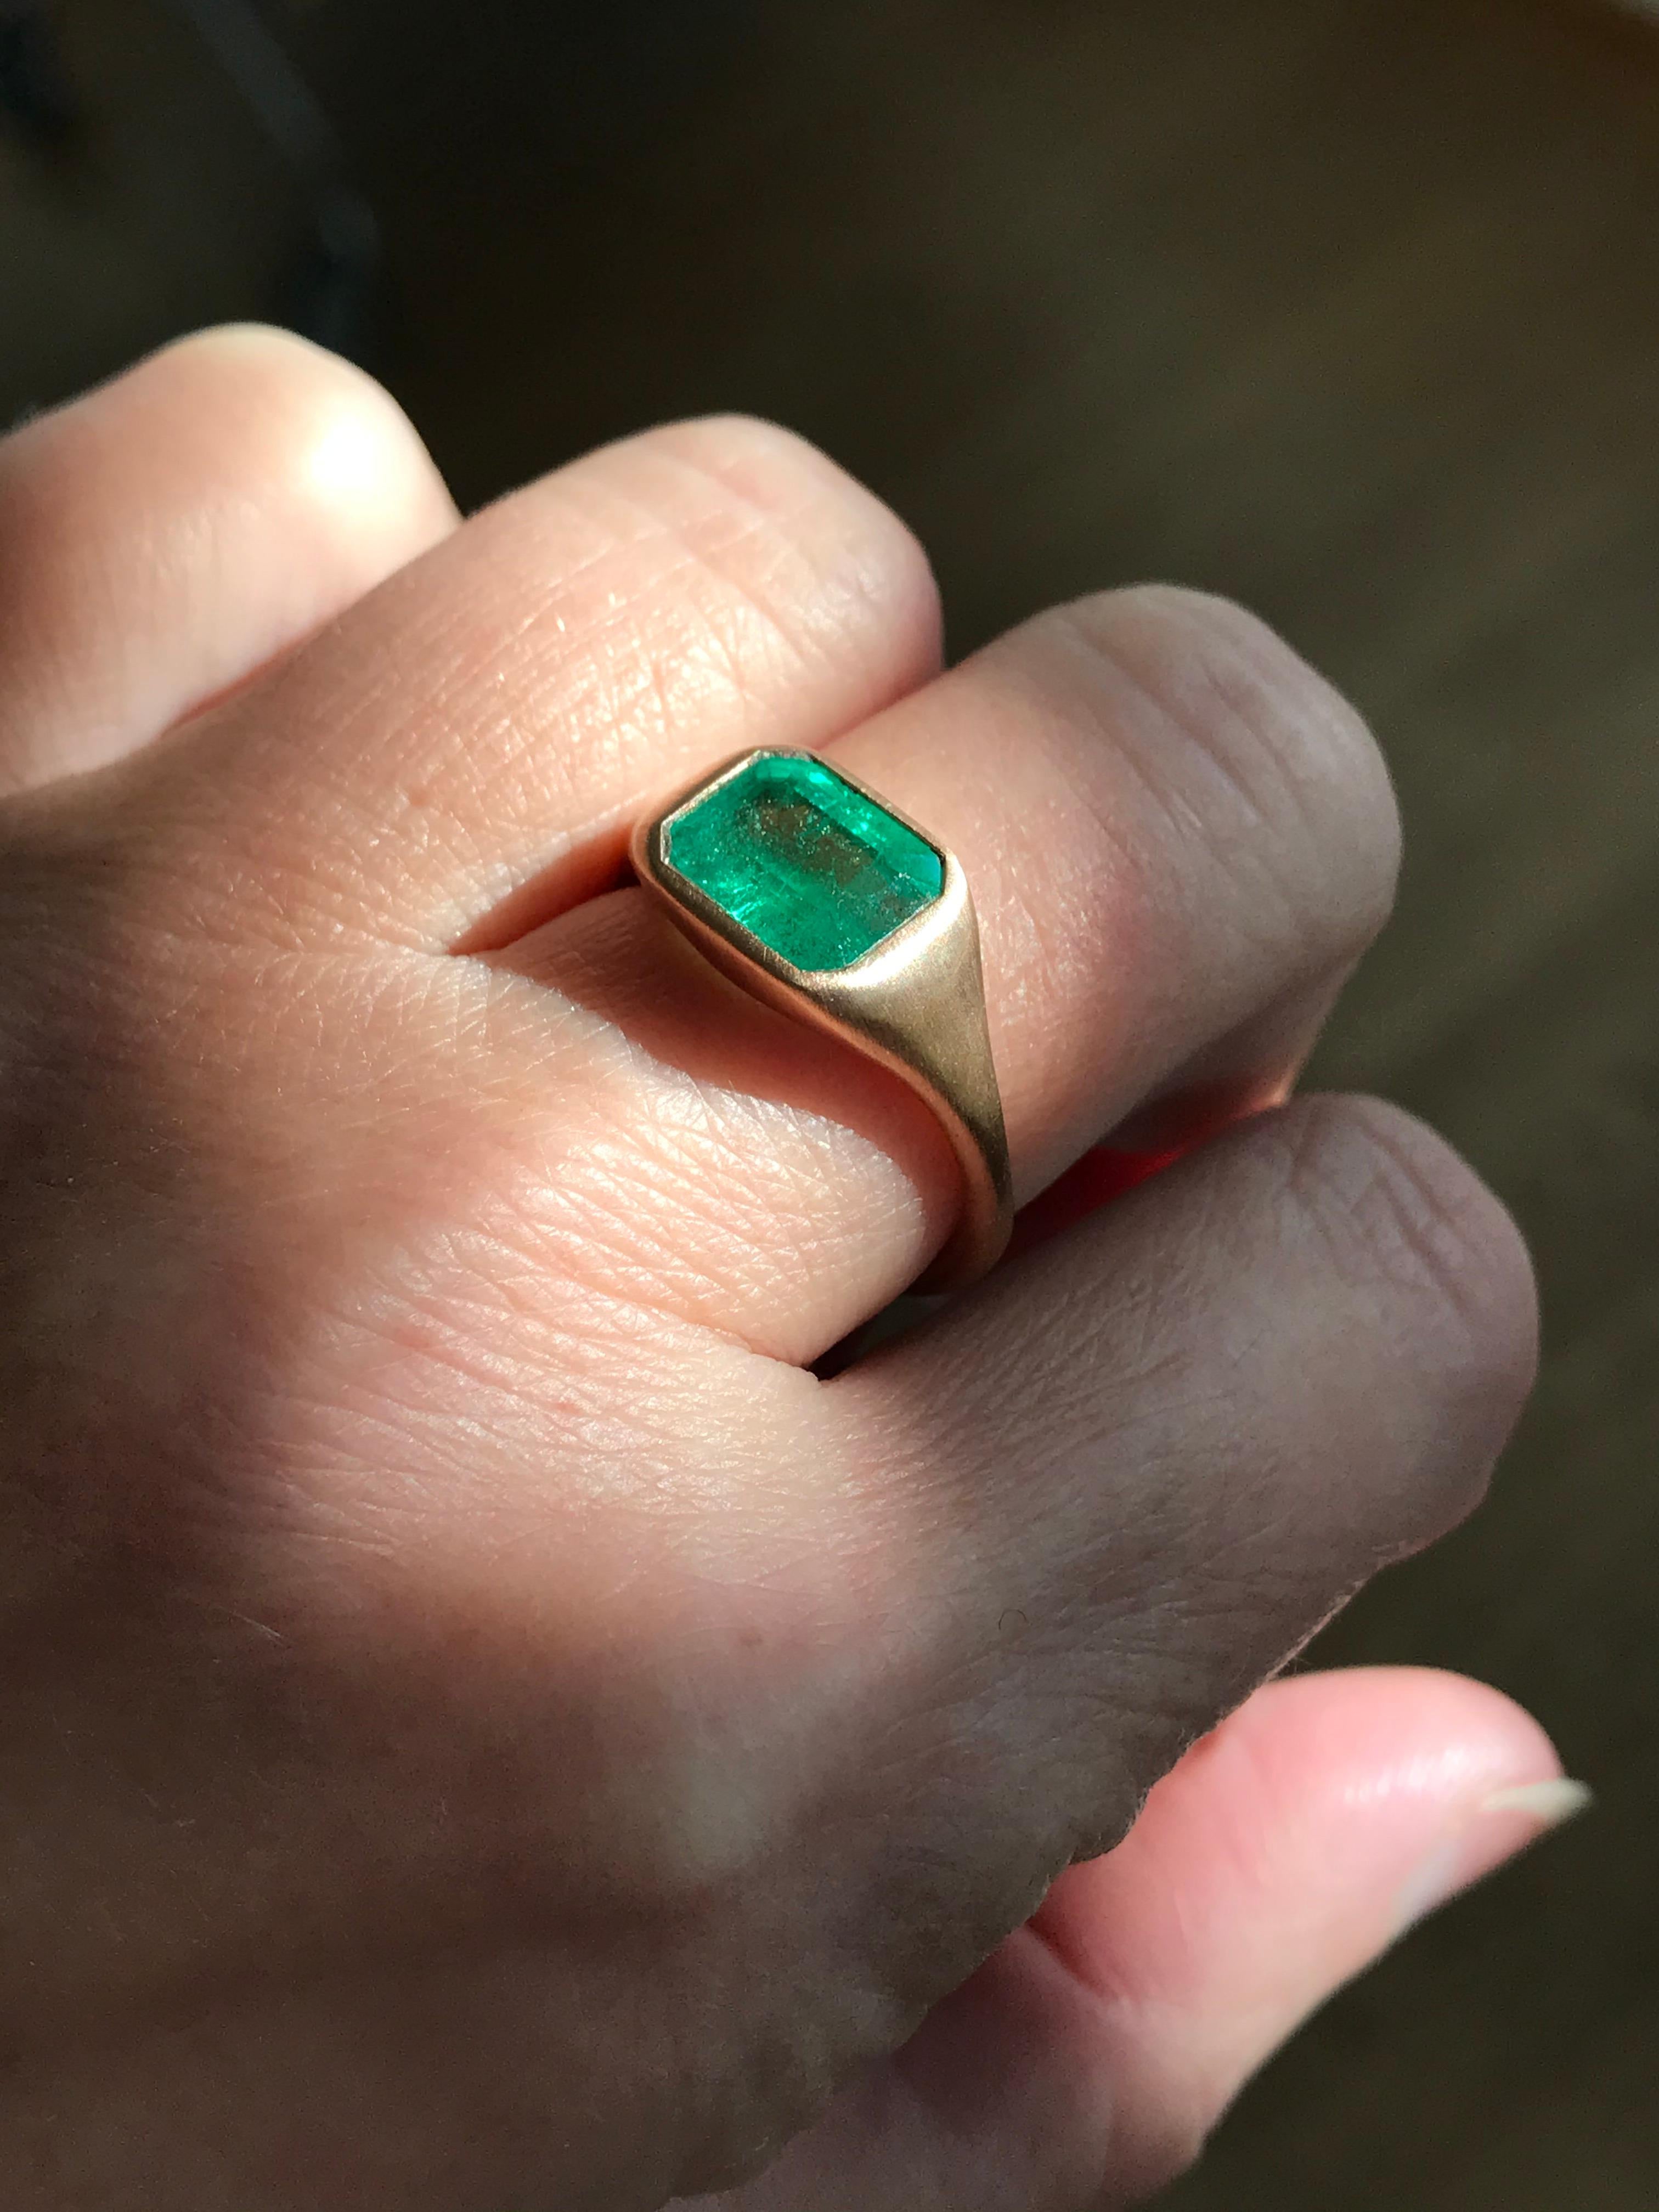 Dalben design One of a Kind 18k rose gold matte finishing ring with a 2,6 carat bezel-set emerald cut emerald. 
Ring size 6 3/4 USA - EU 54 re-sizable to most finger sizes. 
Bezel stone dimensions :
height 8,5 mm
width 11,4 mm
The ring has been